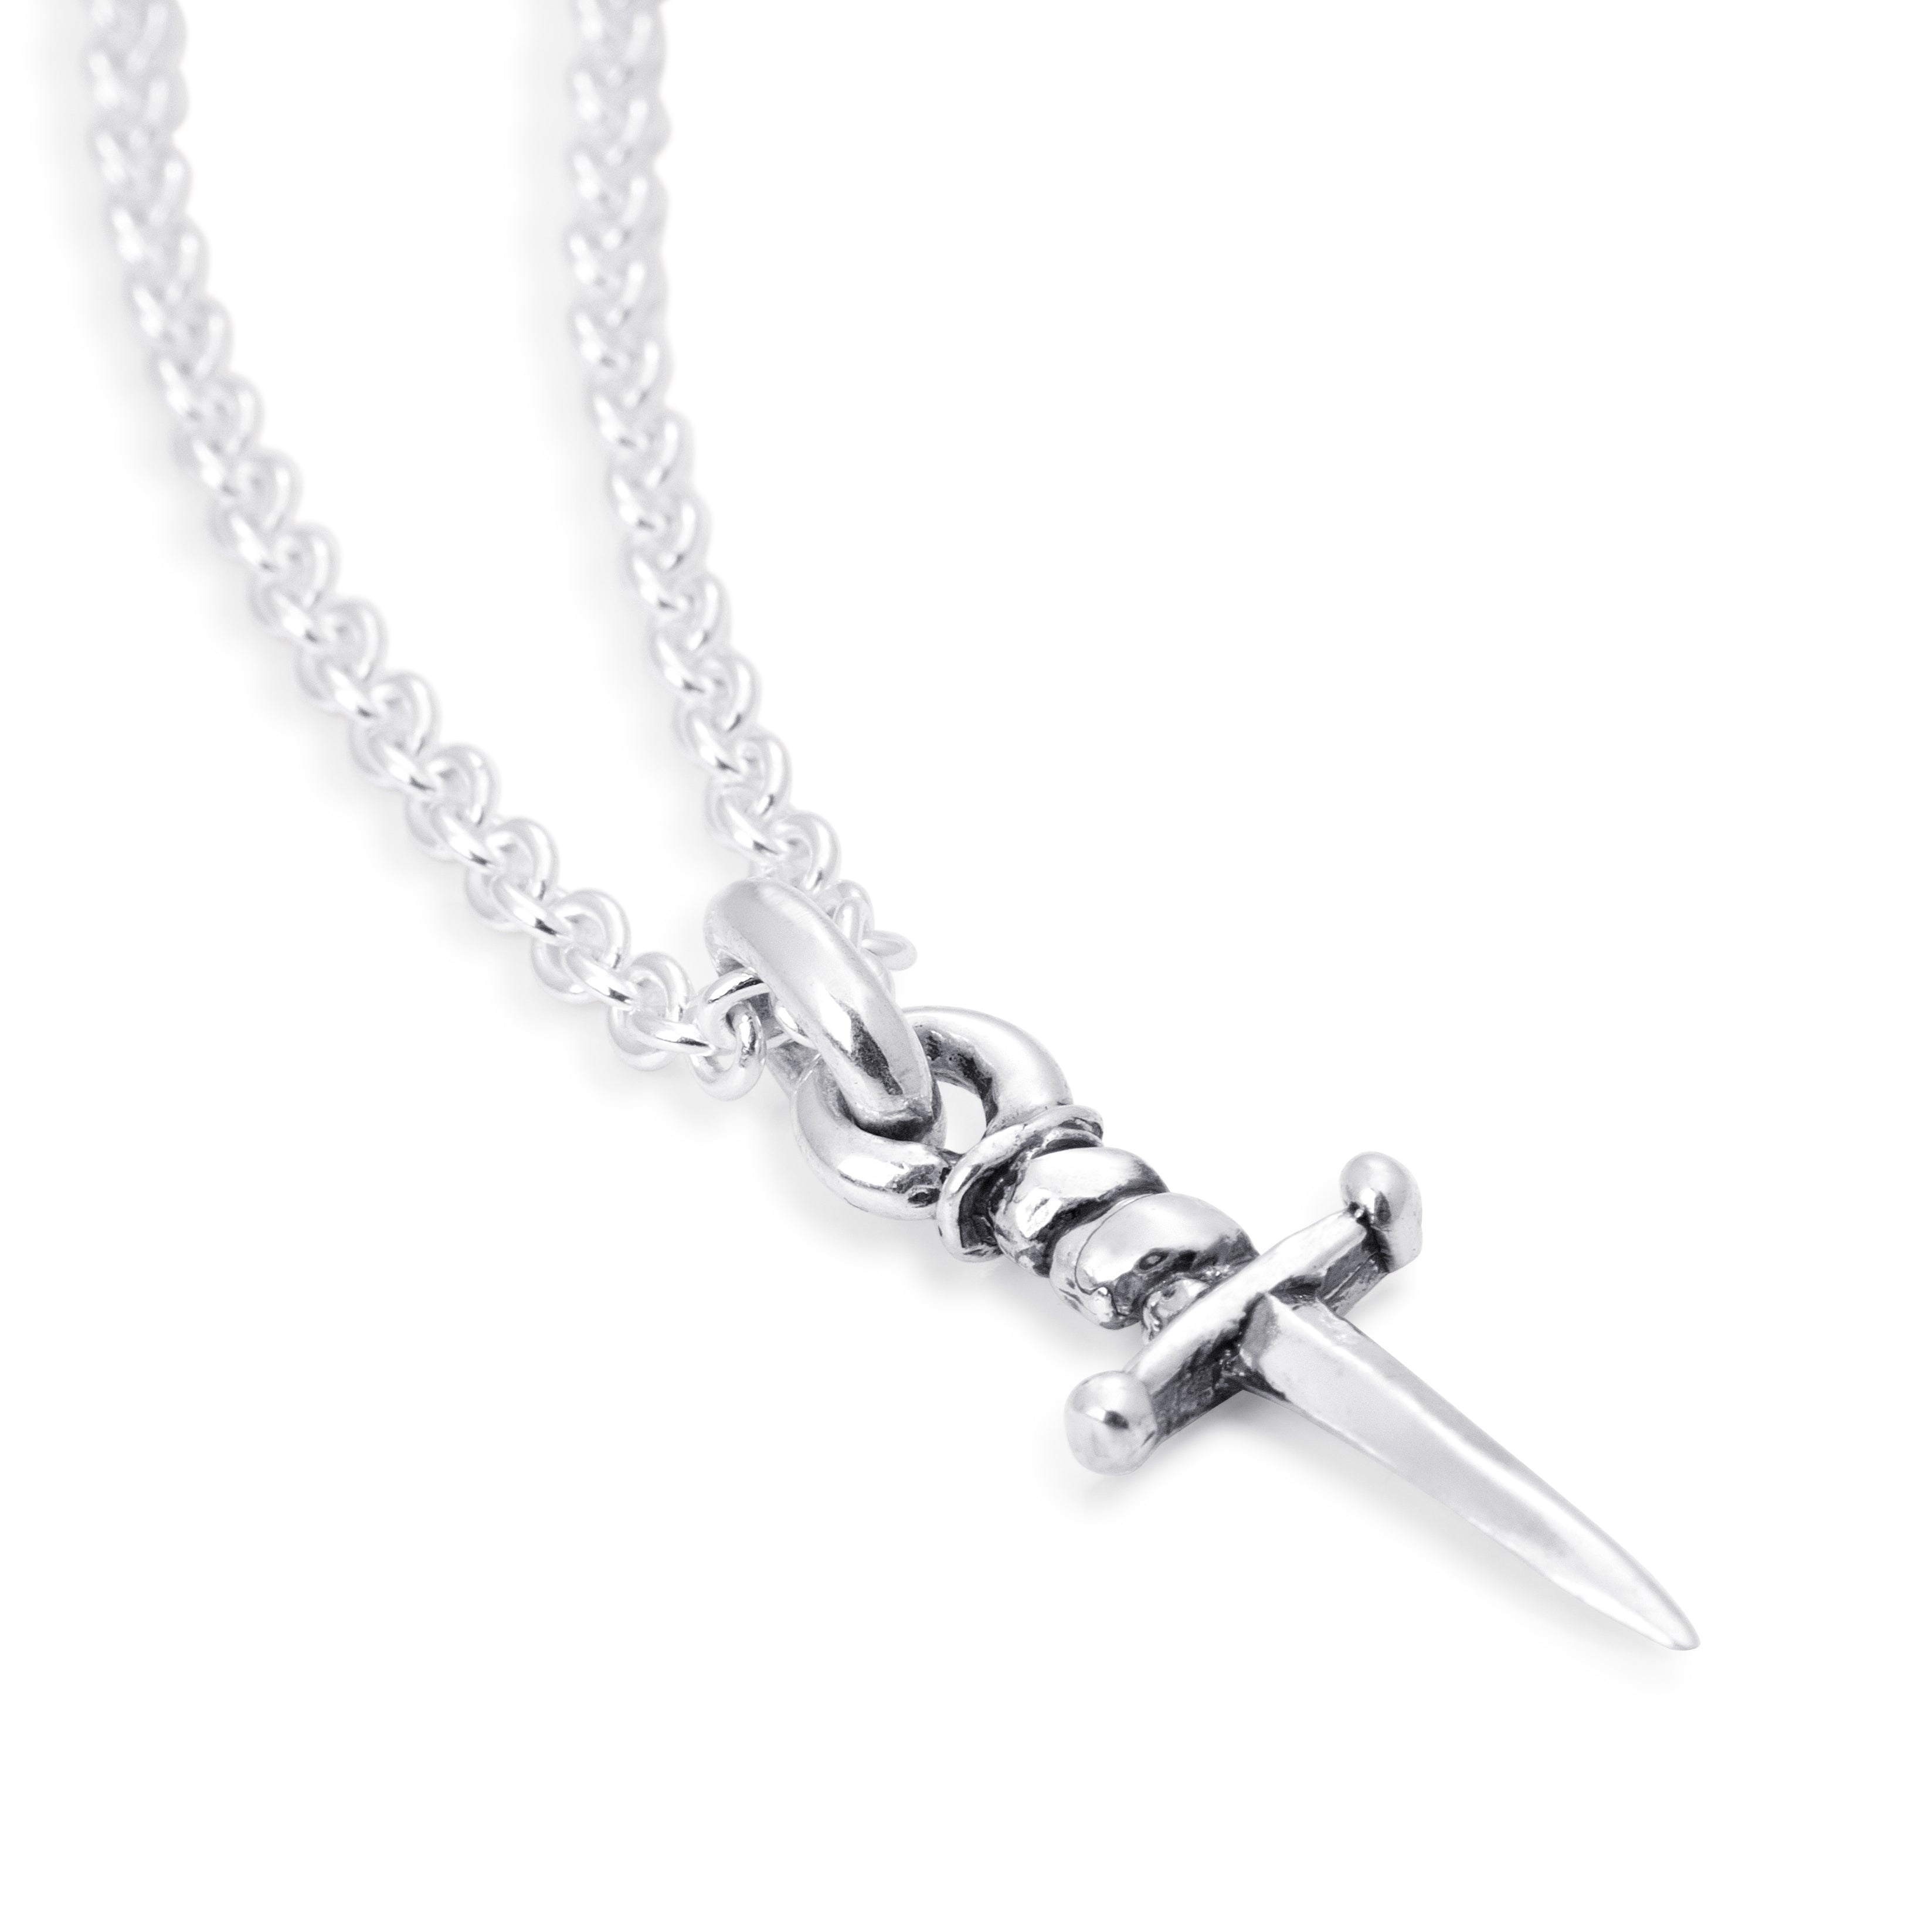 Solid Sterling Silver dagger hanging on a chain